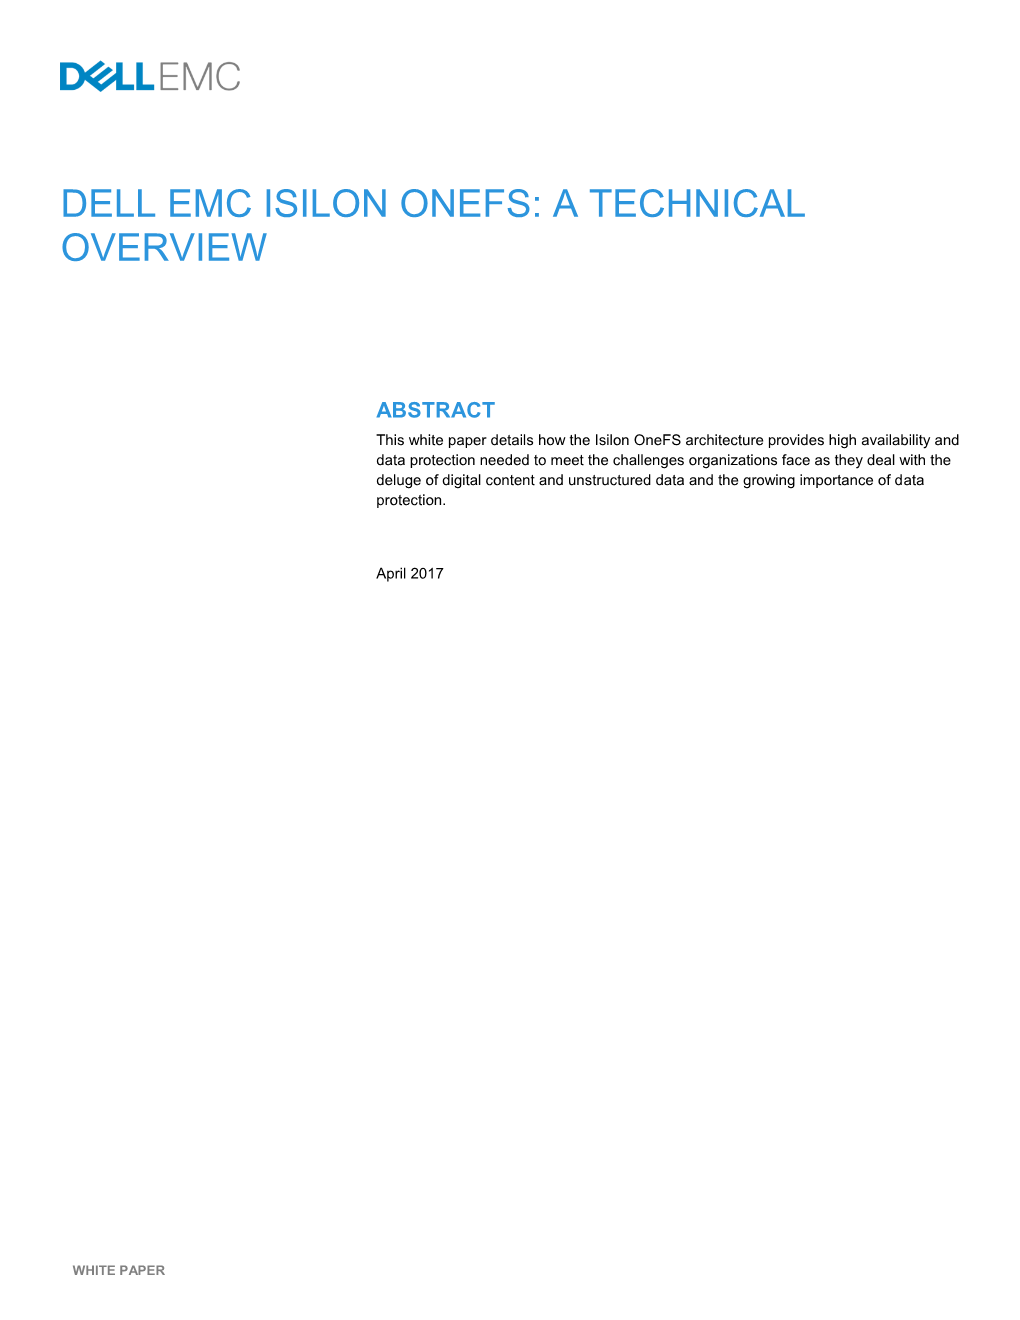 Dell Emc Isilon Onefs: a Technical Overview